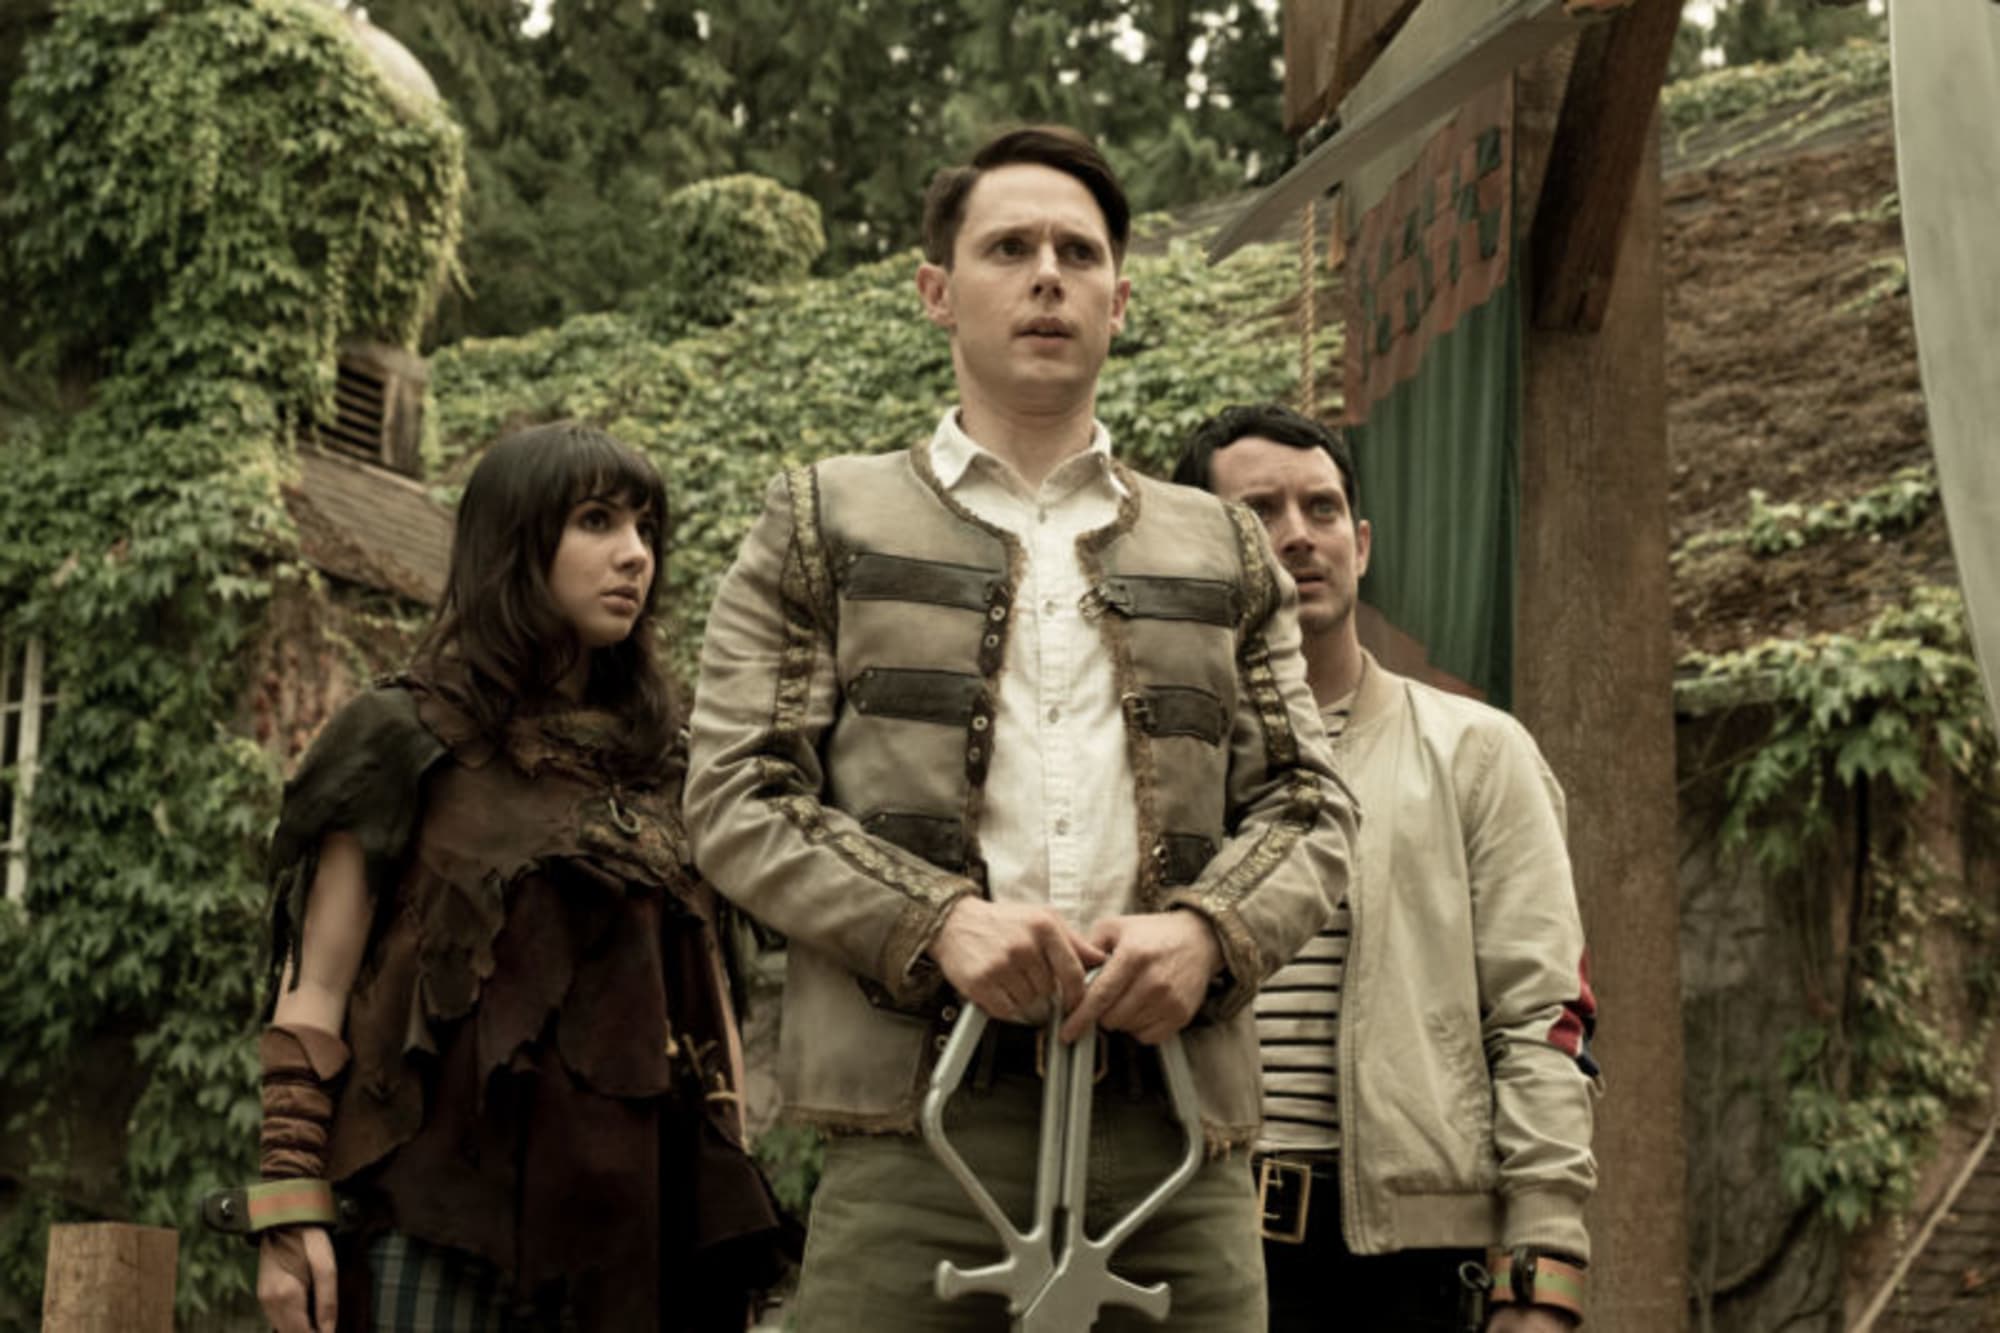 dirk gently holistic detective agency bbc